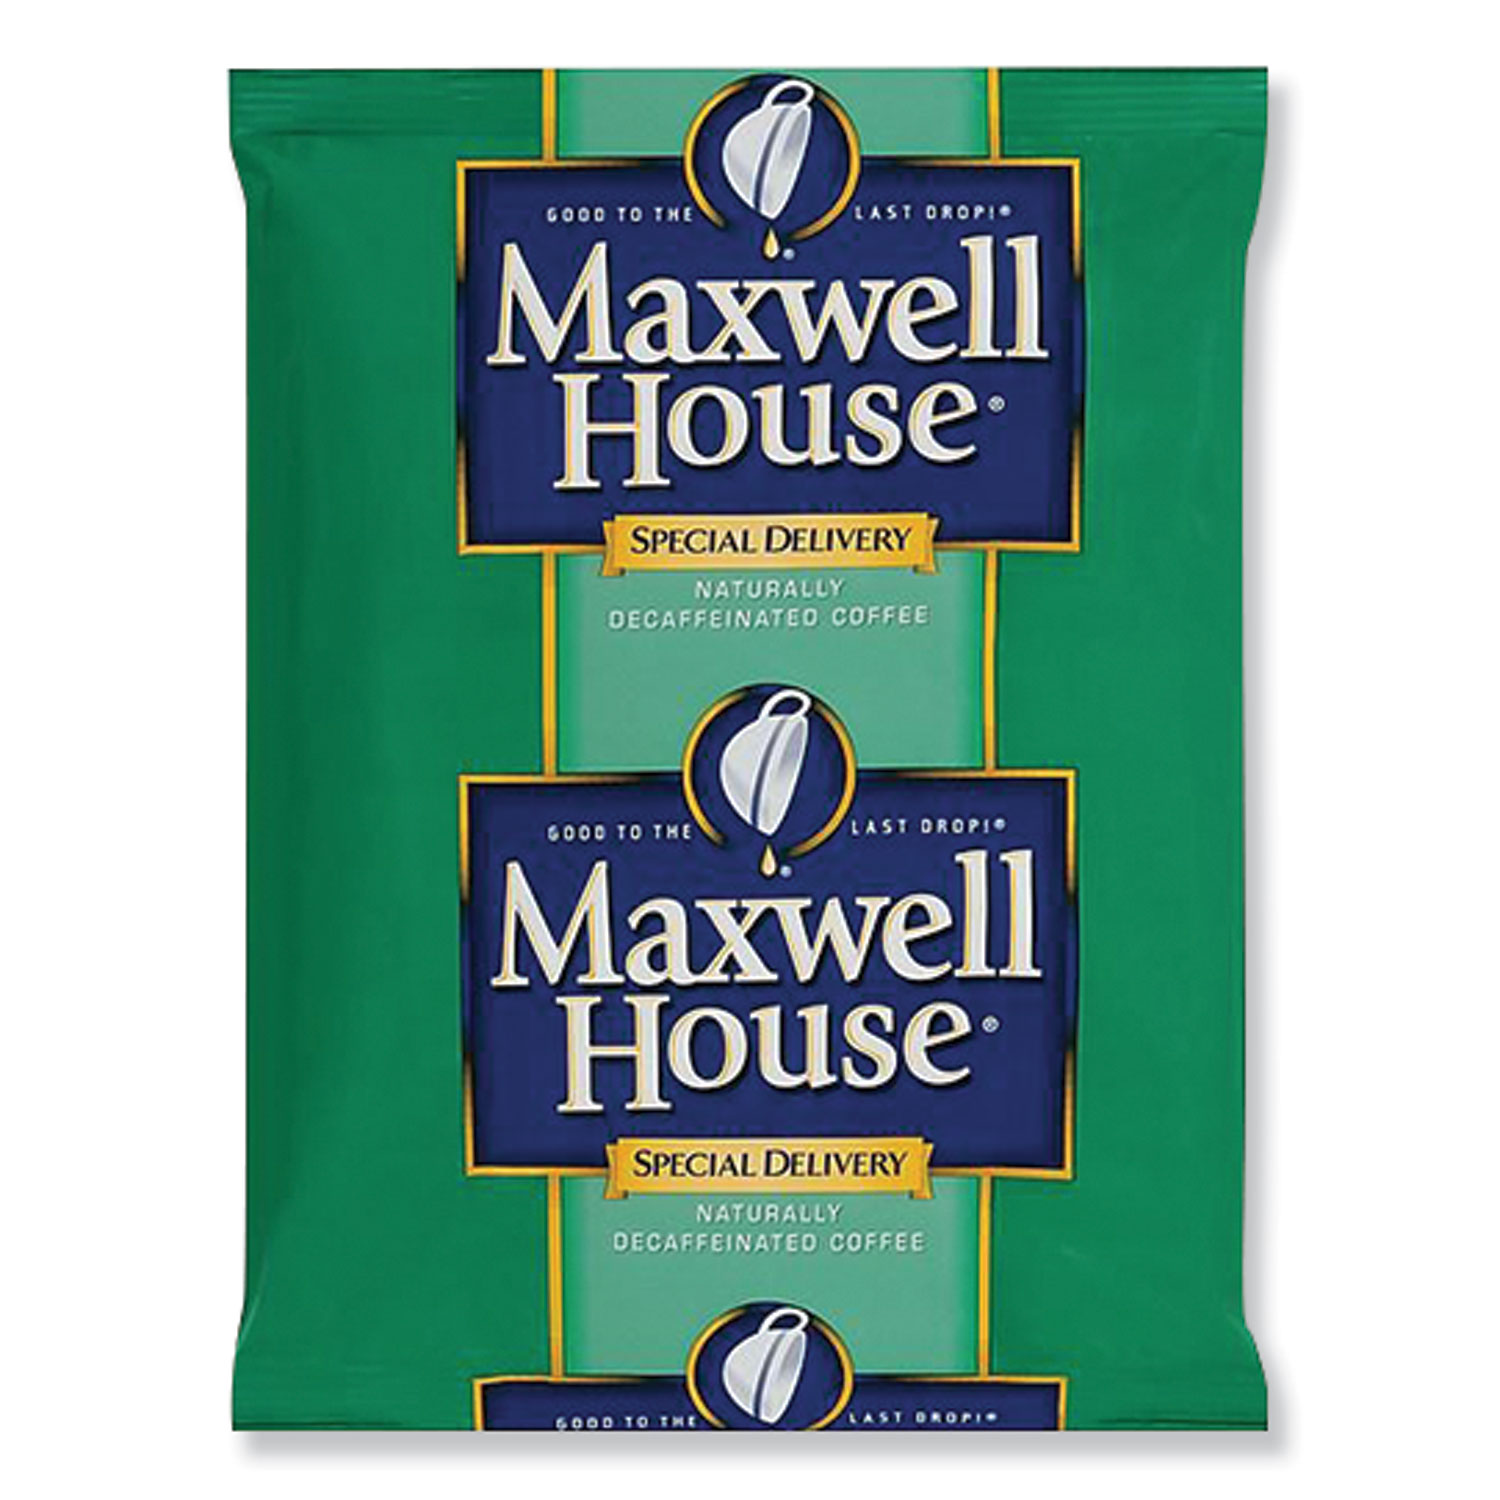  Maxwell House GEN885900 Coffee, Special Delivery Decaf Filter Packs Coffee, Medium Roast, 42/Carton (MWH420123) 